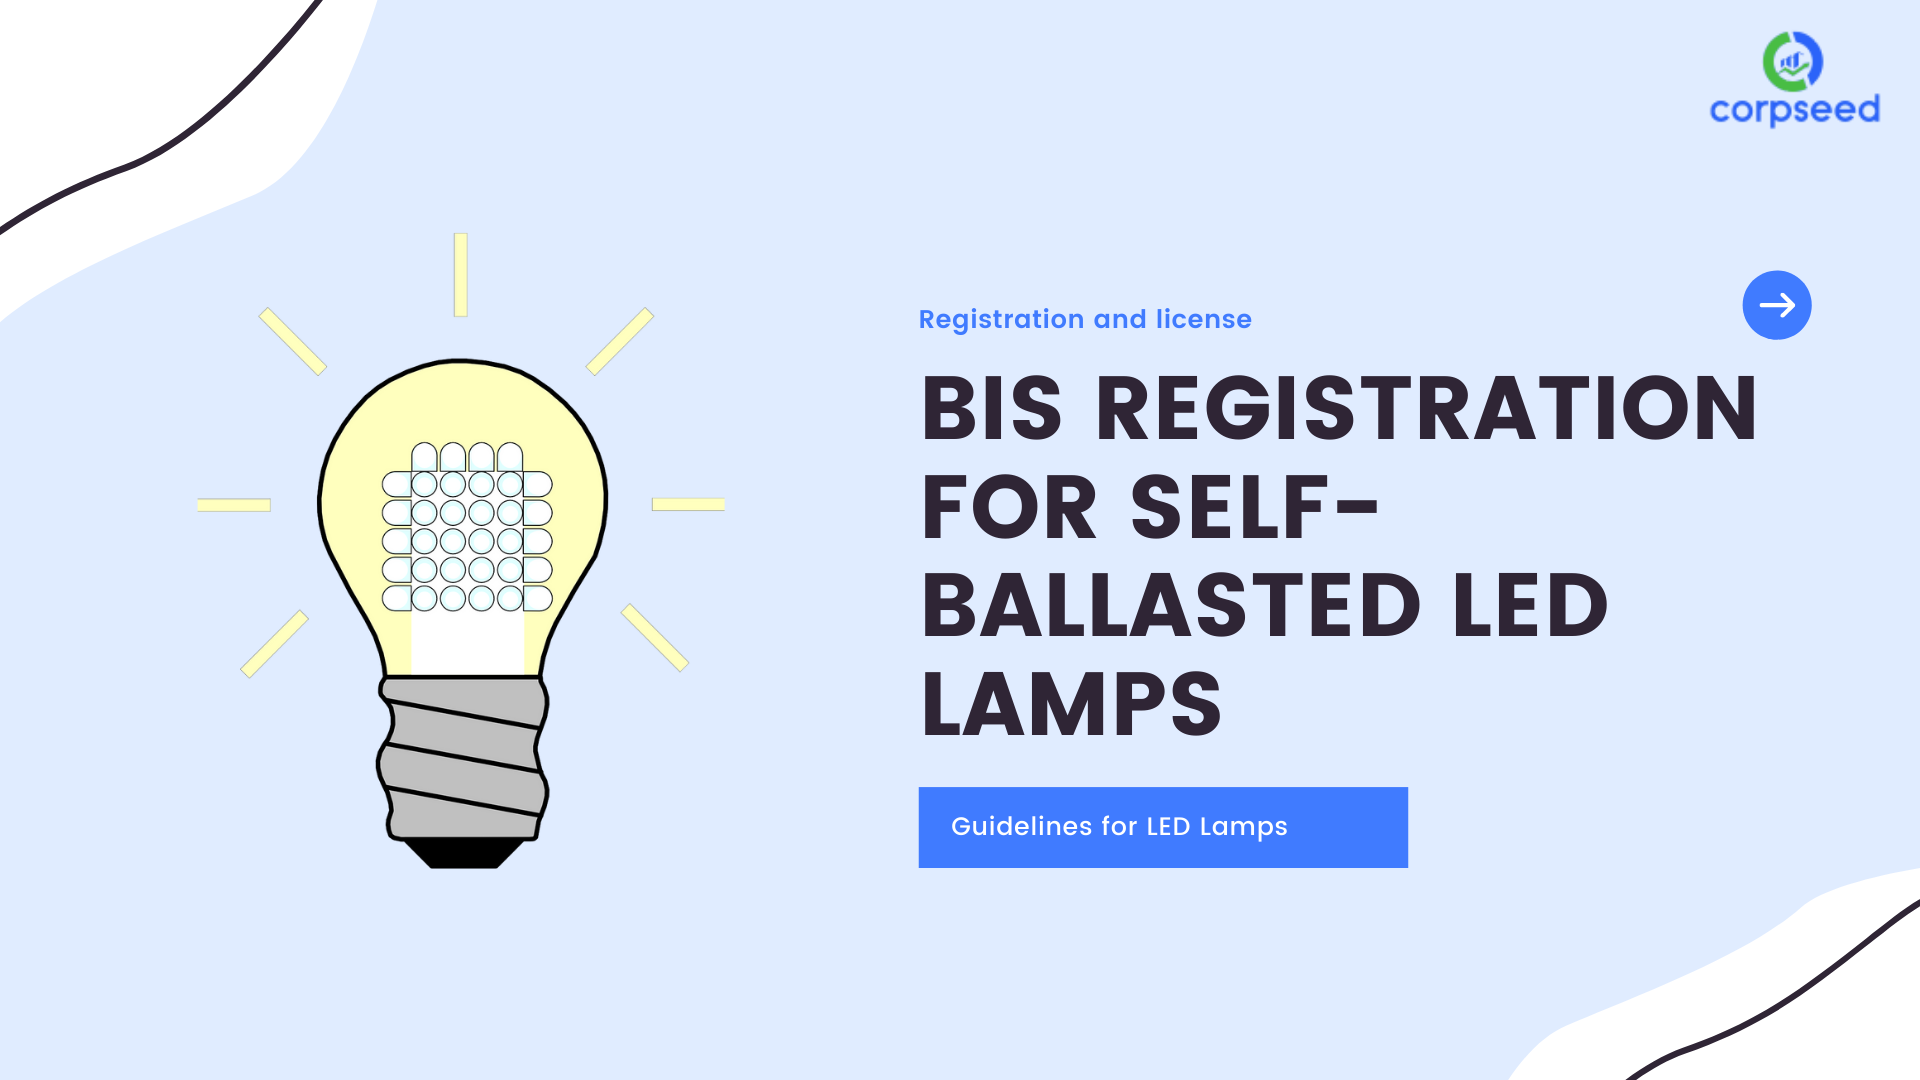 bis-registration-for-self-ballasted-led-lamps_corpseed.png